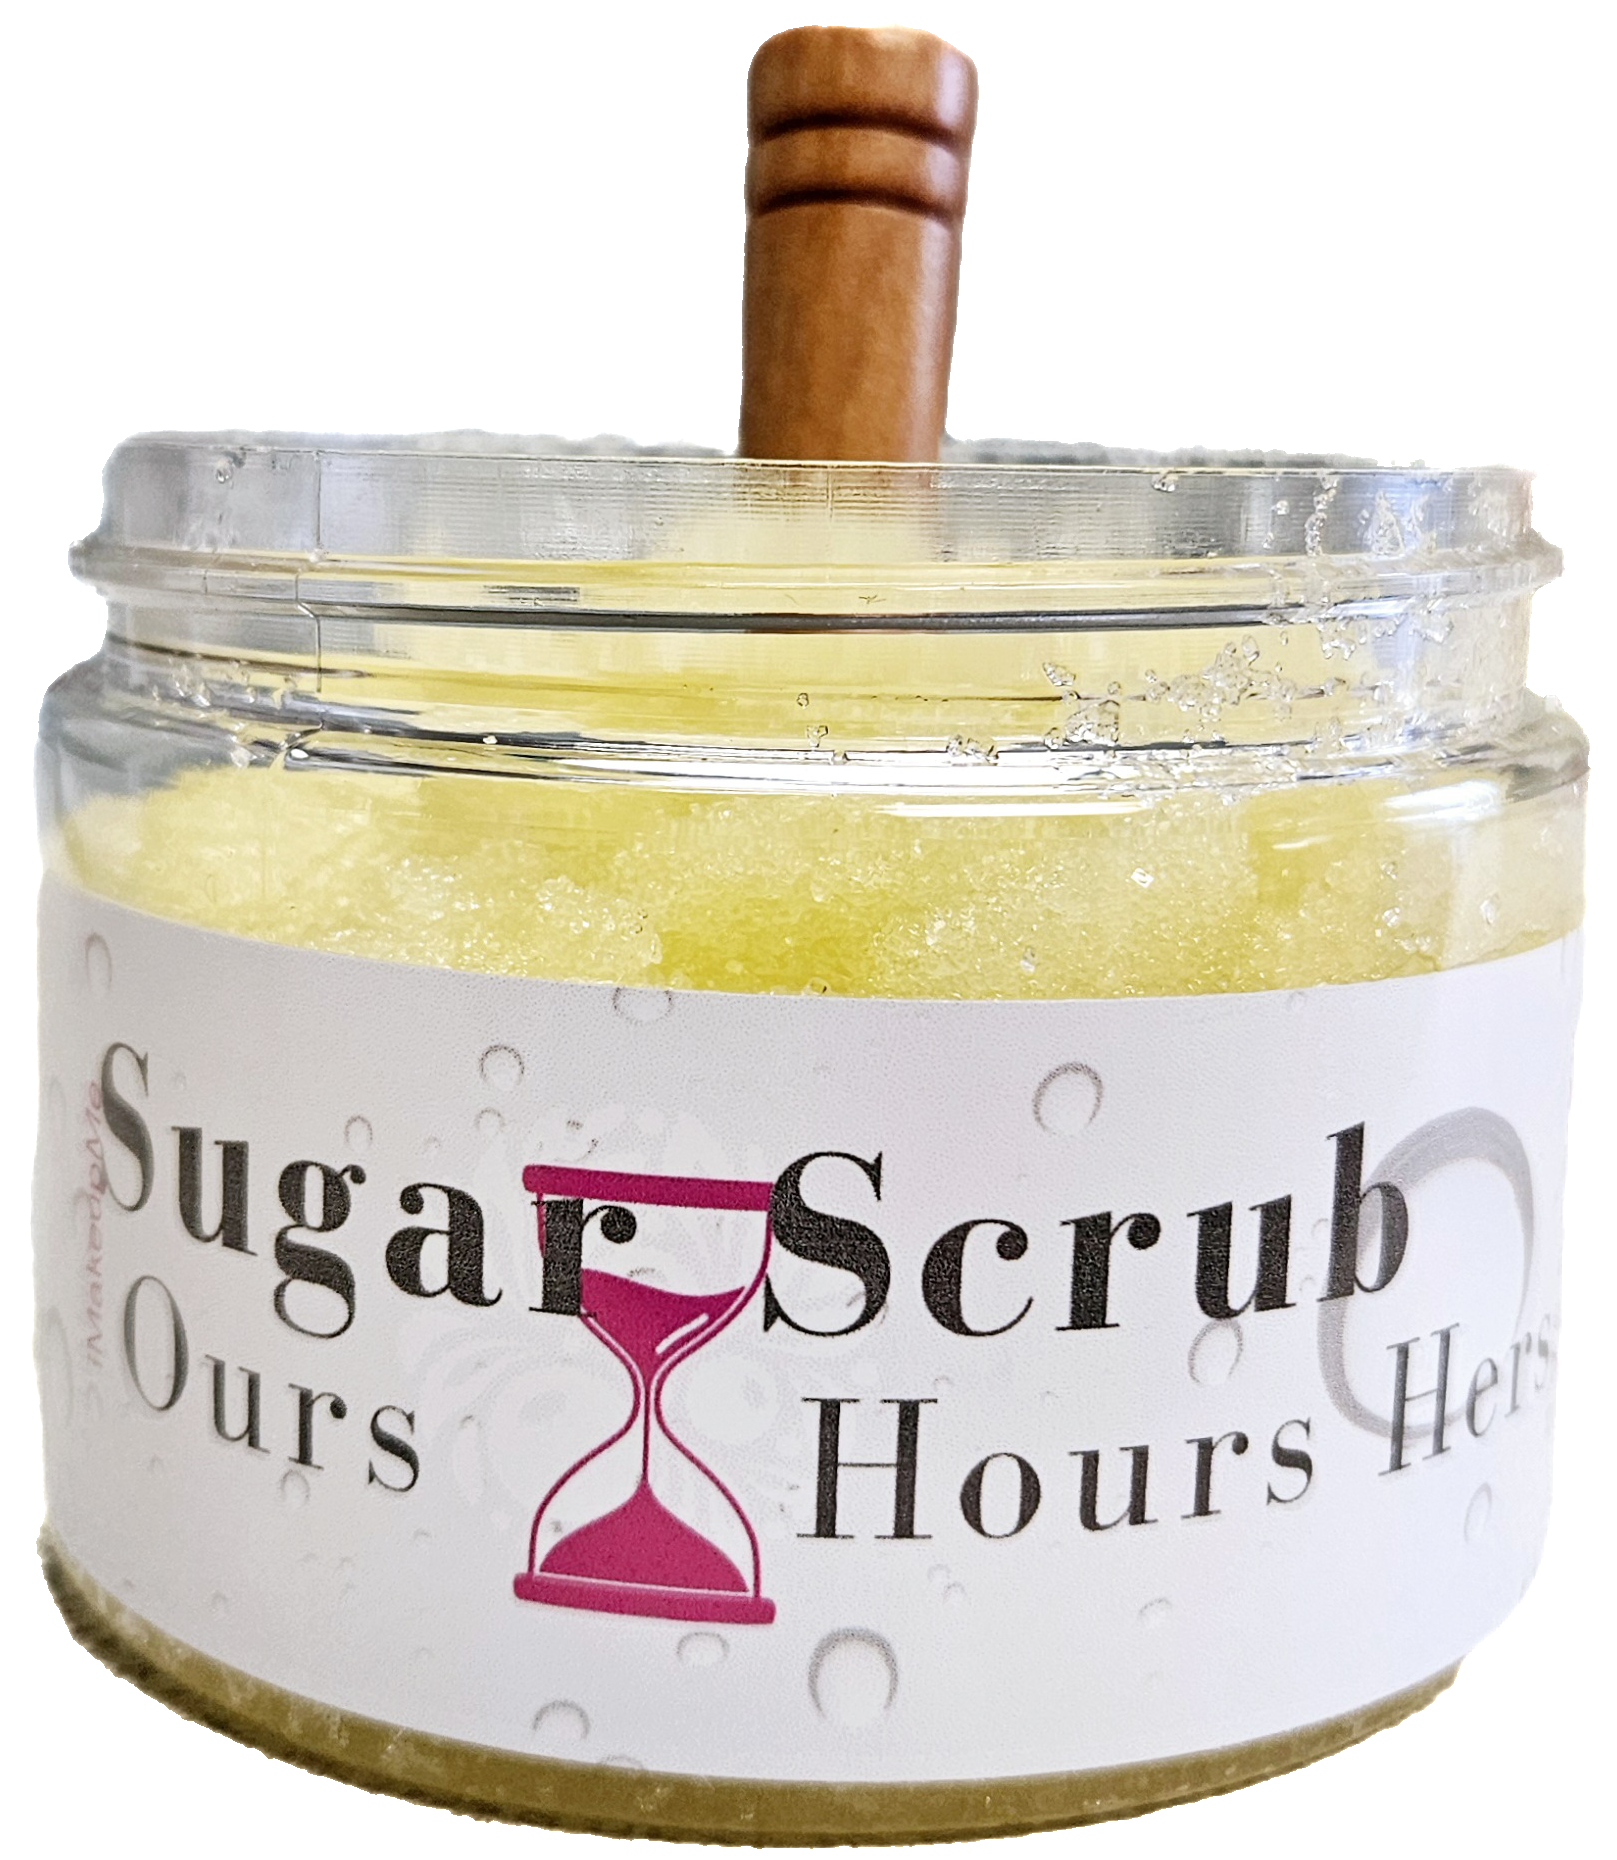 Ours & Hours Hers Sugar Scrub